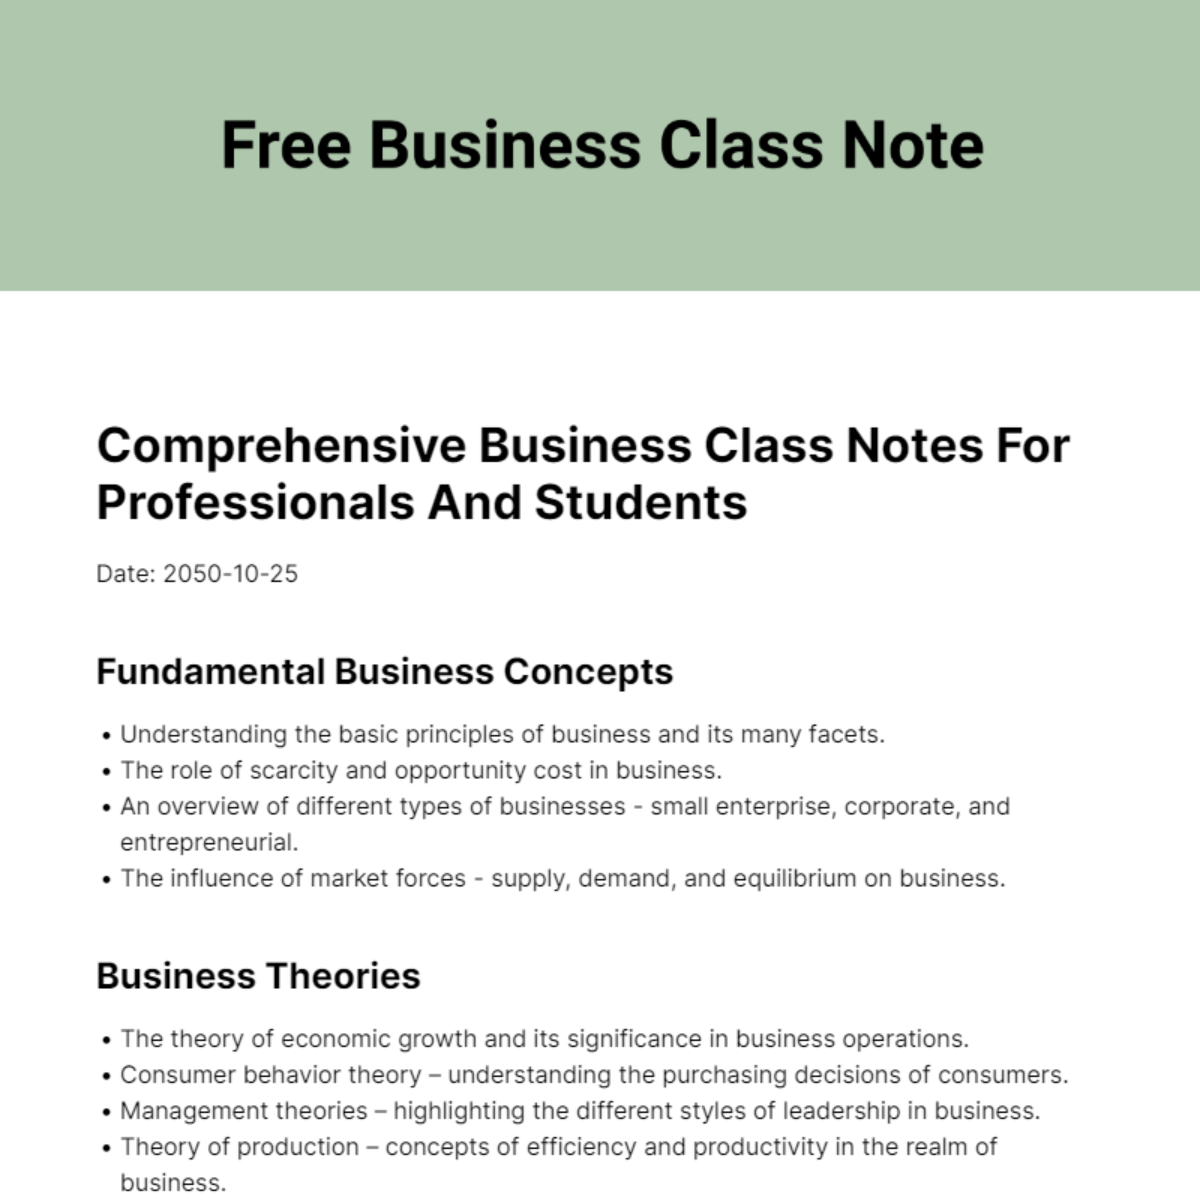 Free Business Class Note Template